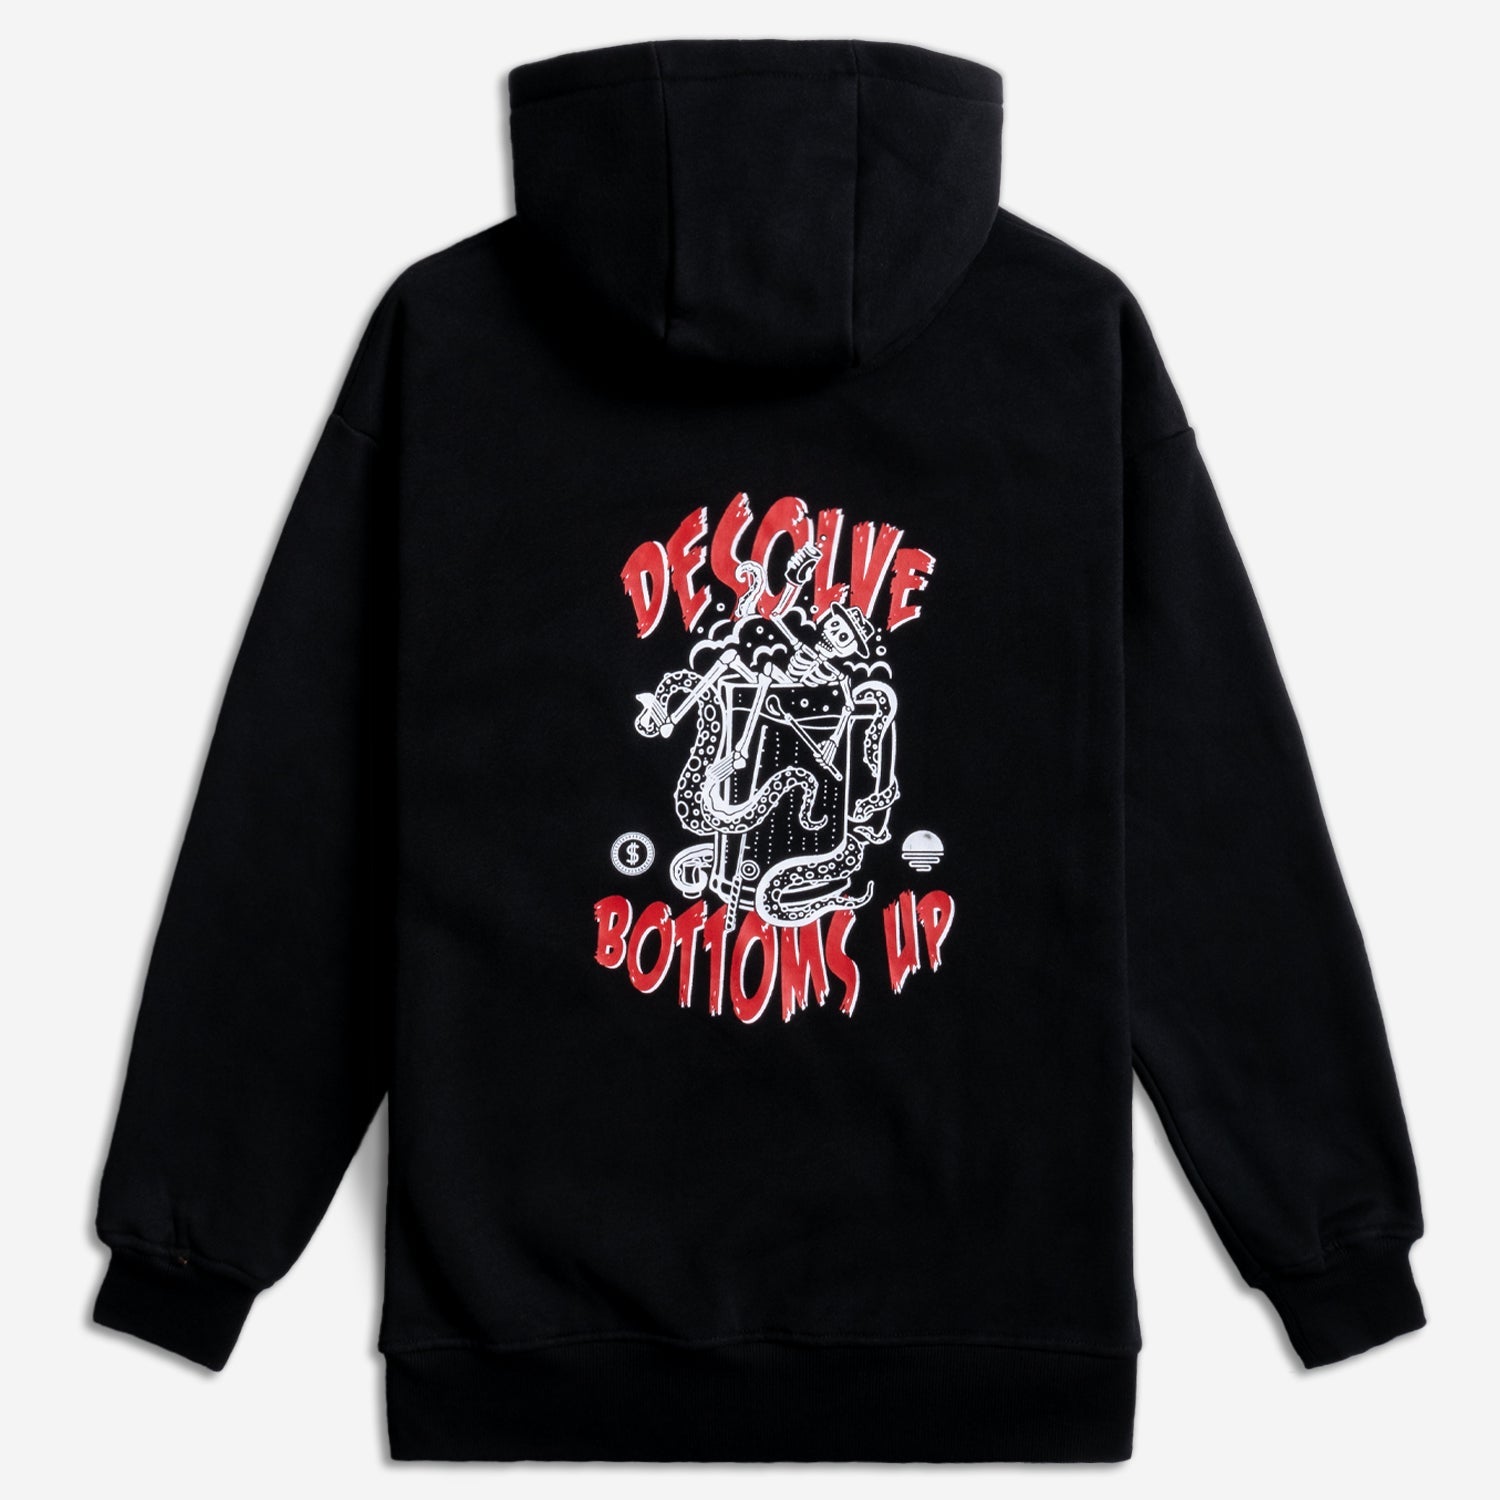 Bottoms Up Hoodie